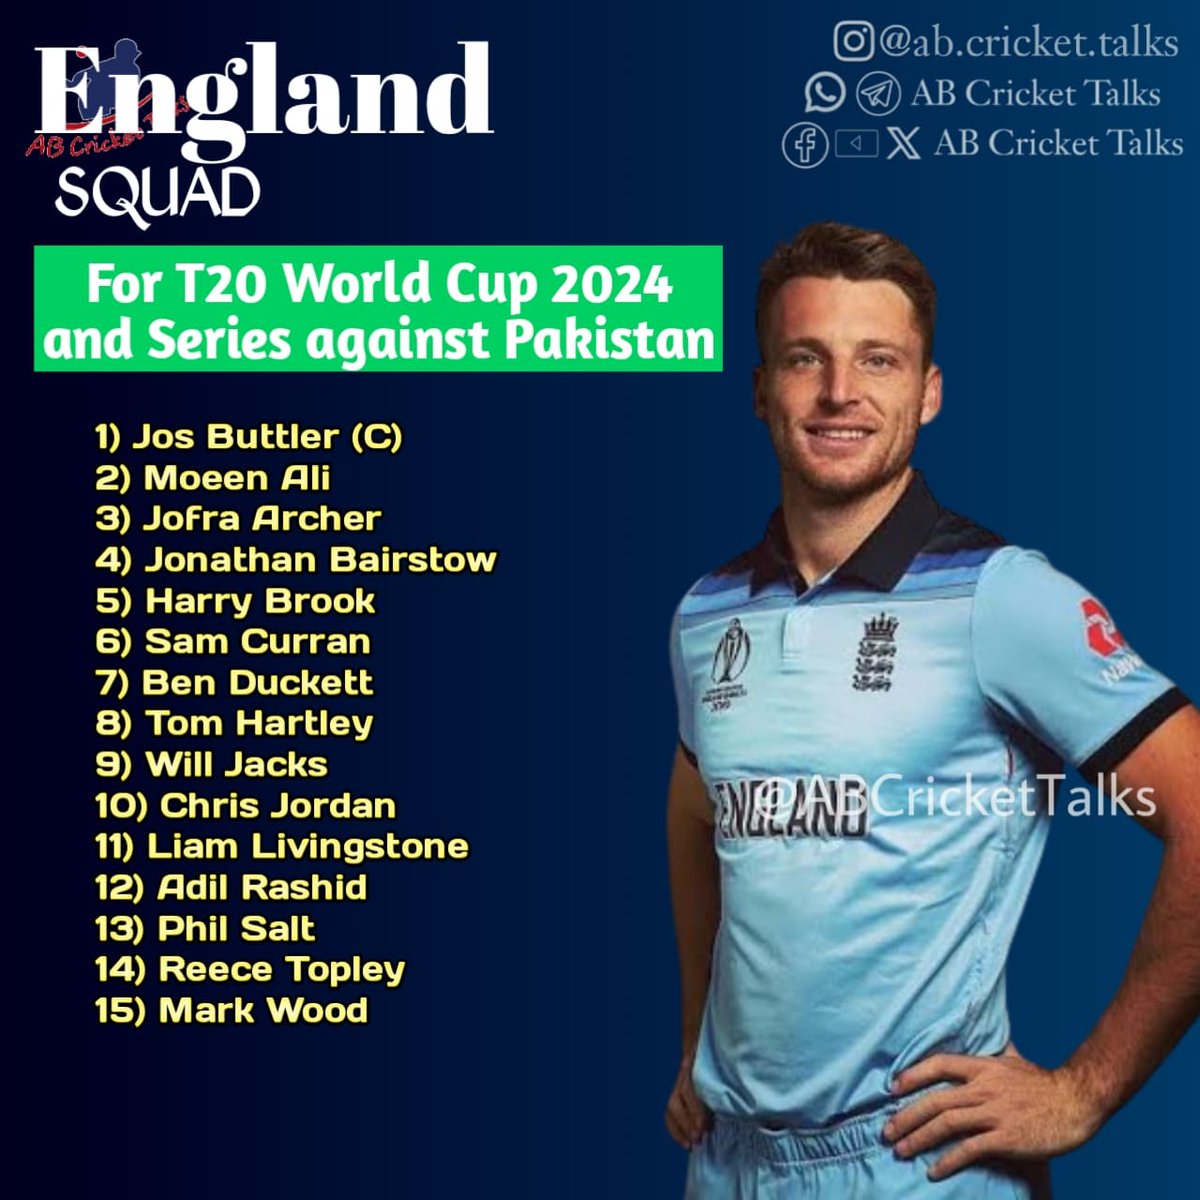 Here is the squad of England team for the T20 World Cup 2024 and series against Pakistan
Jofra Archer returning to international Cricket after a long time

#ABCricketTalks #CricketTalksWithArpit 

#EnglandCricket #HappyBirthdayRohitSharma #ecb #duckybhai #jofraarcher